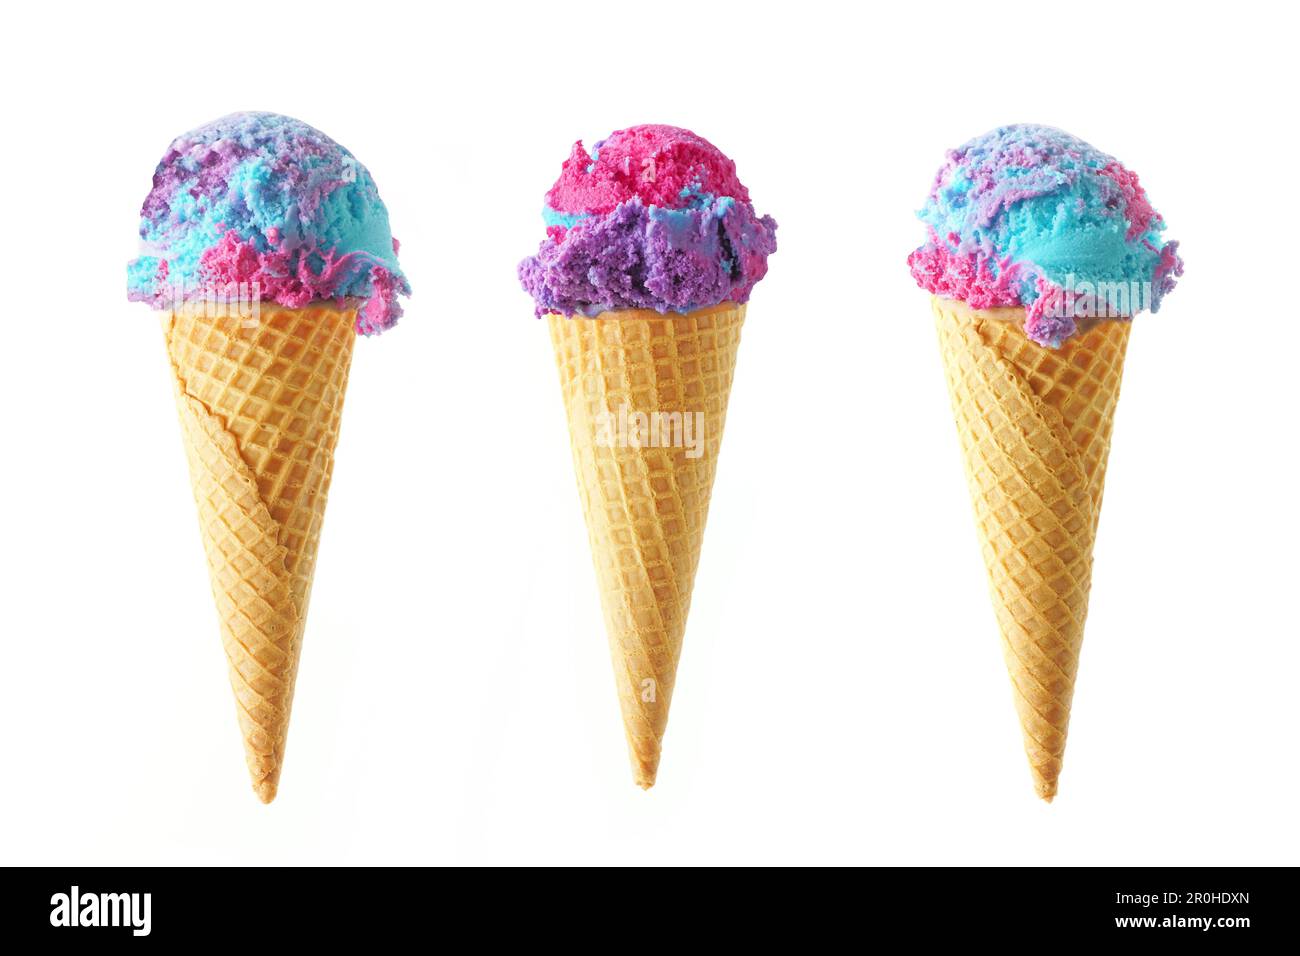 Three cotton candy flavored ice cream cones isolated on a white background. Pink, blue and purple color. Stock Photo